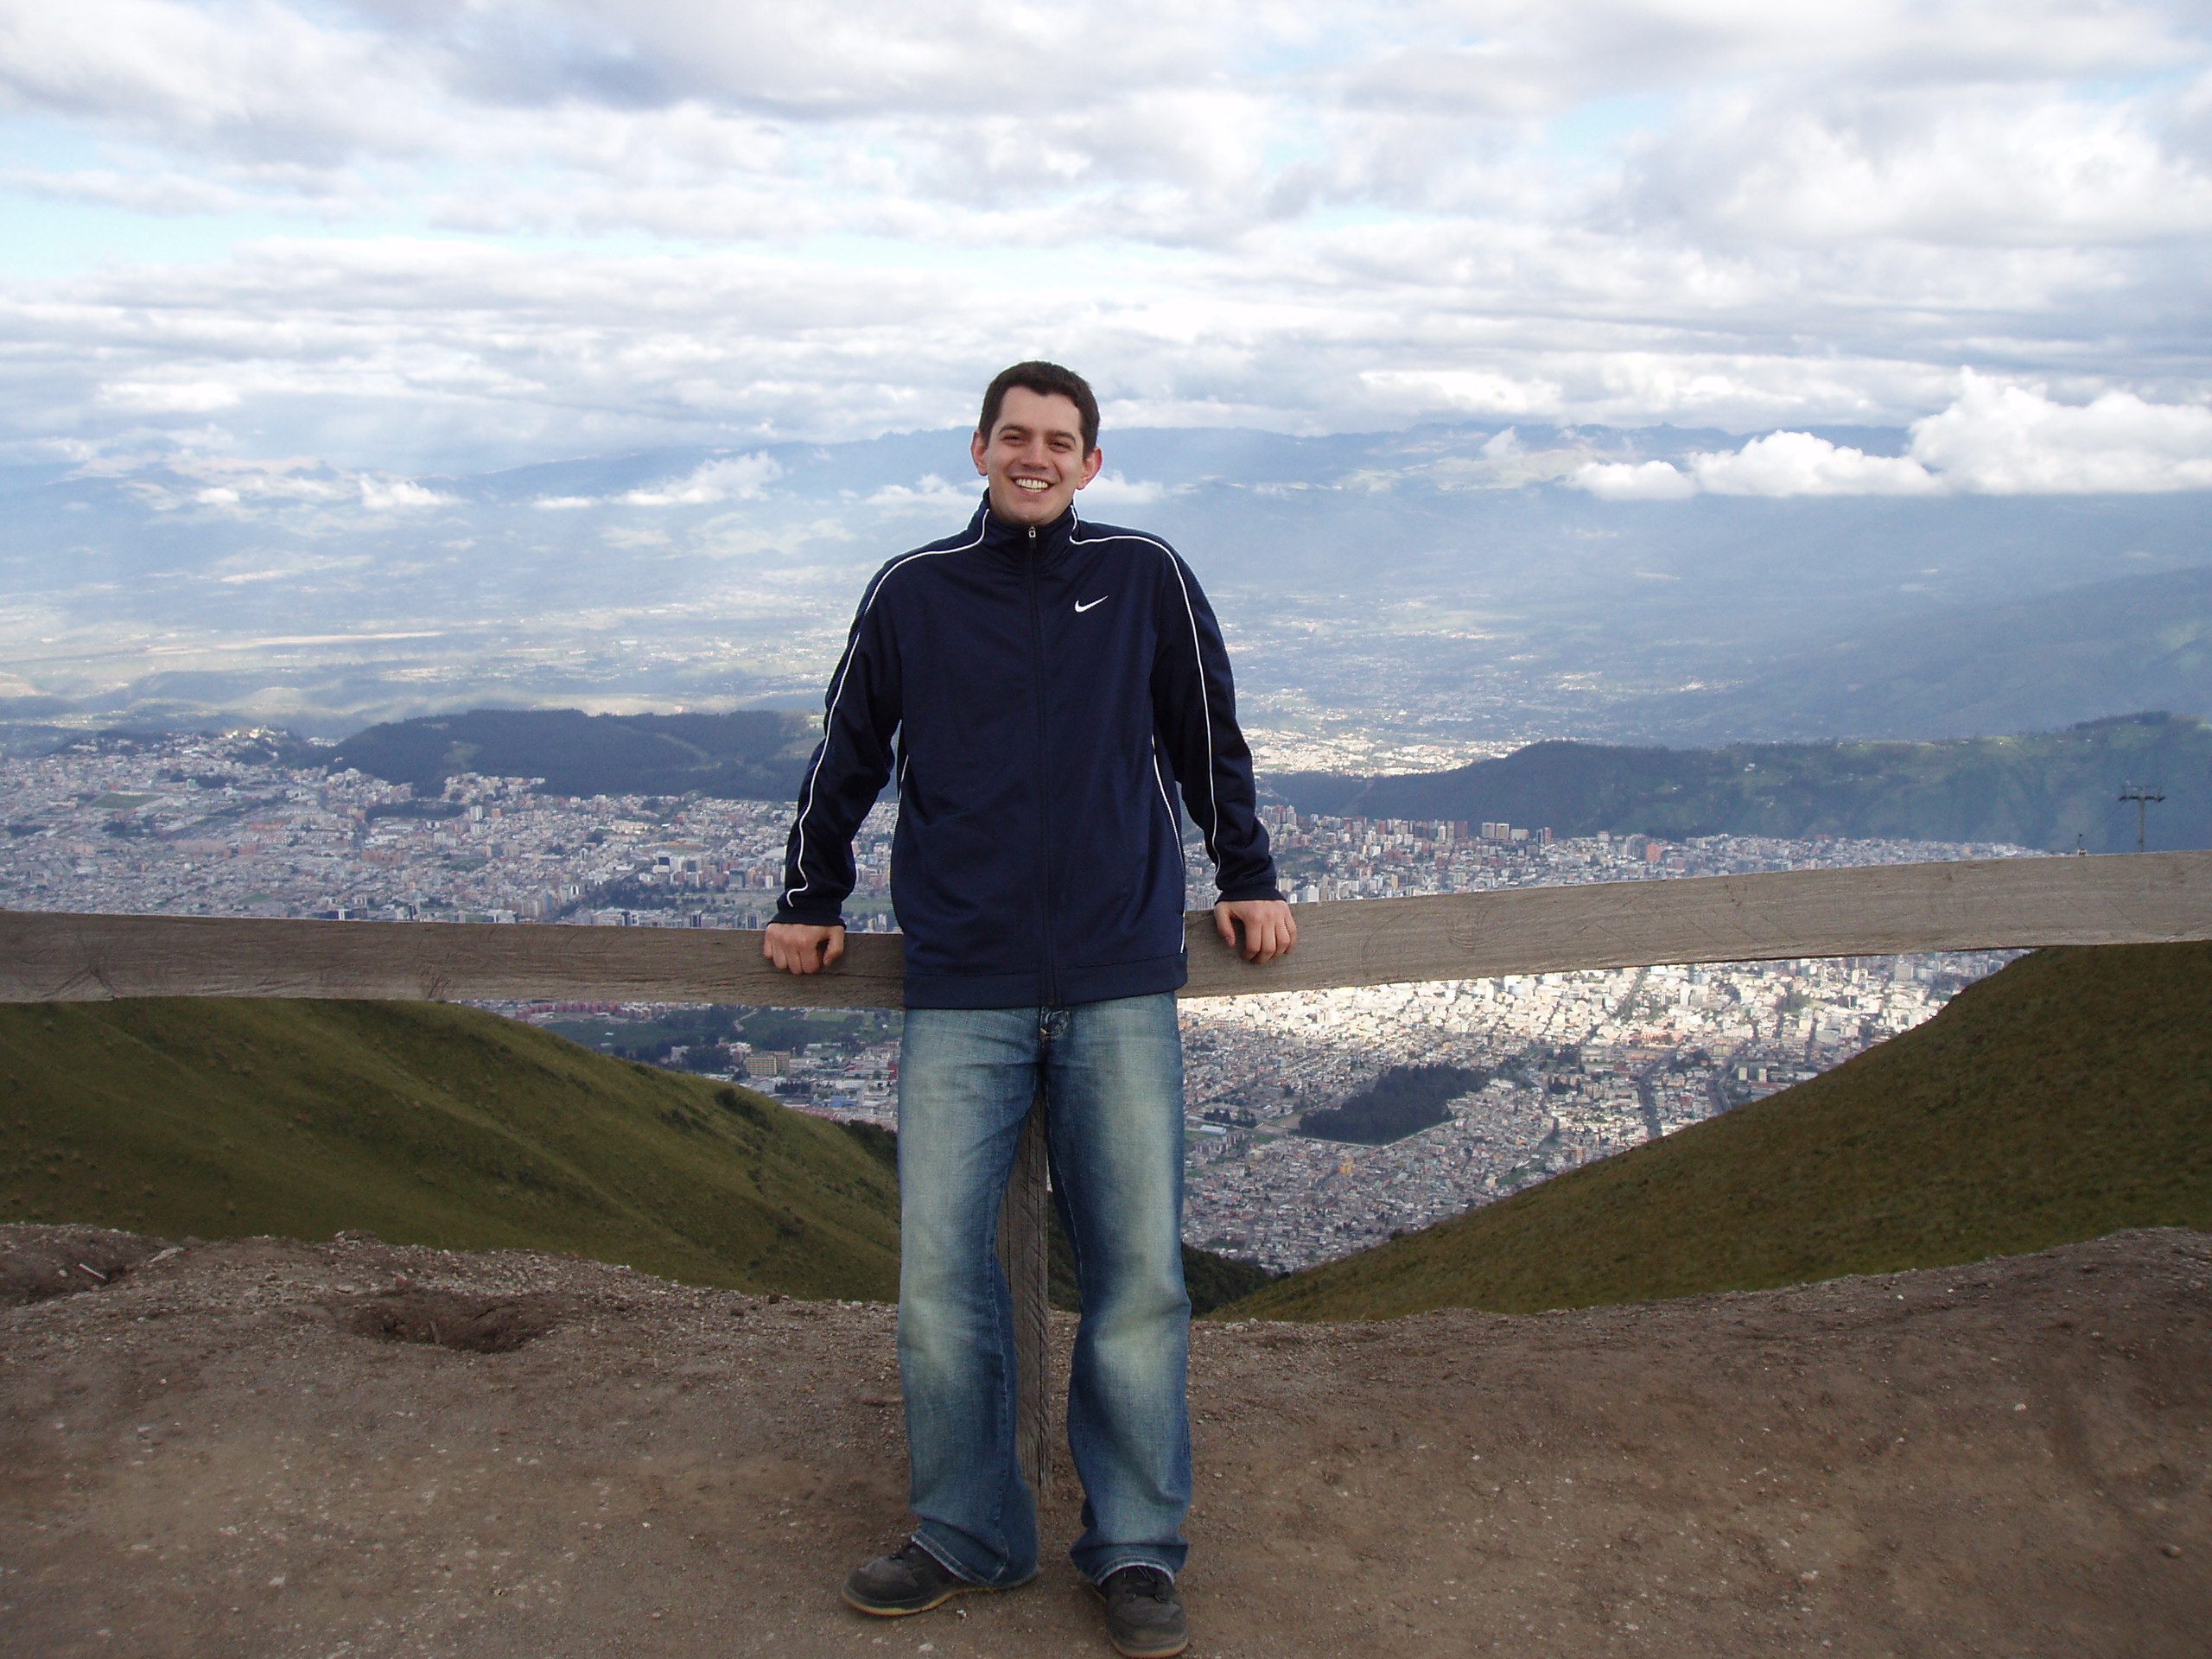 Robert Bryan Scott, age 25, with Quito in the background!